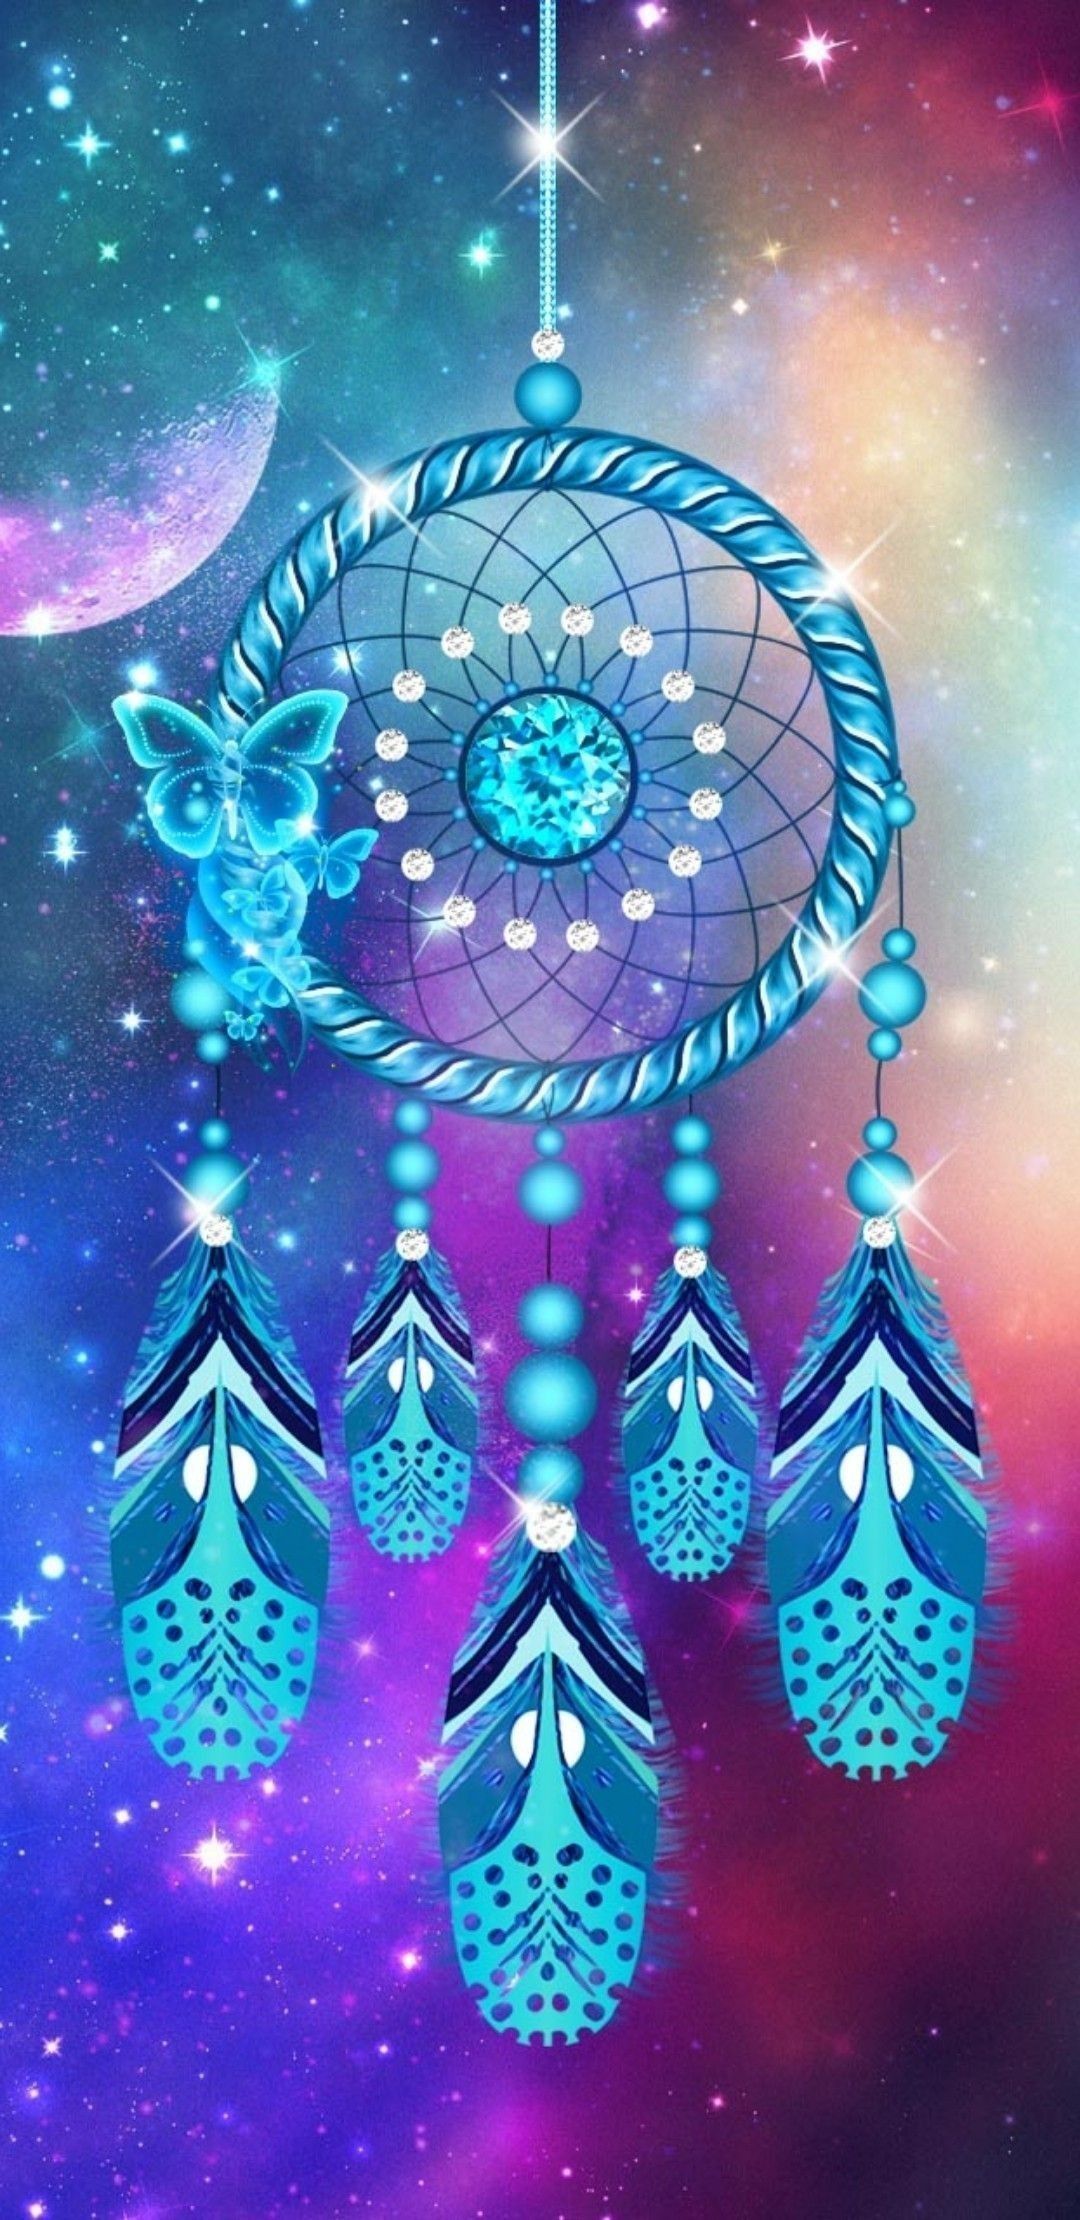 I Can See Your Dreams Dreamcatcher Wallpaper Dream Catcher